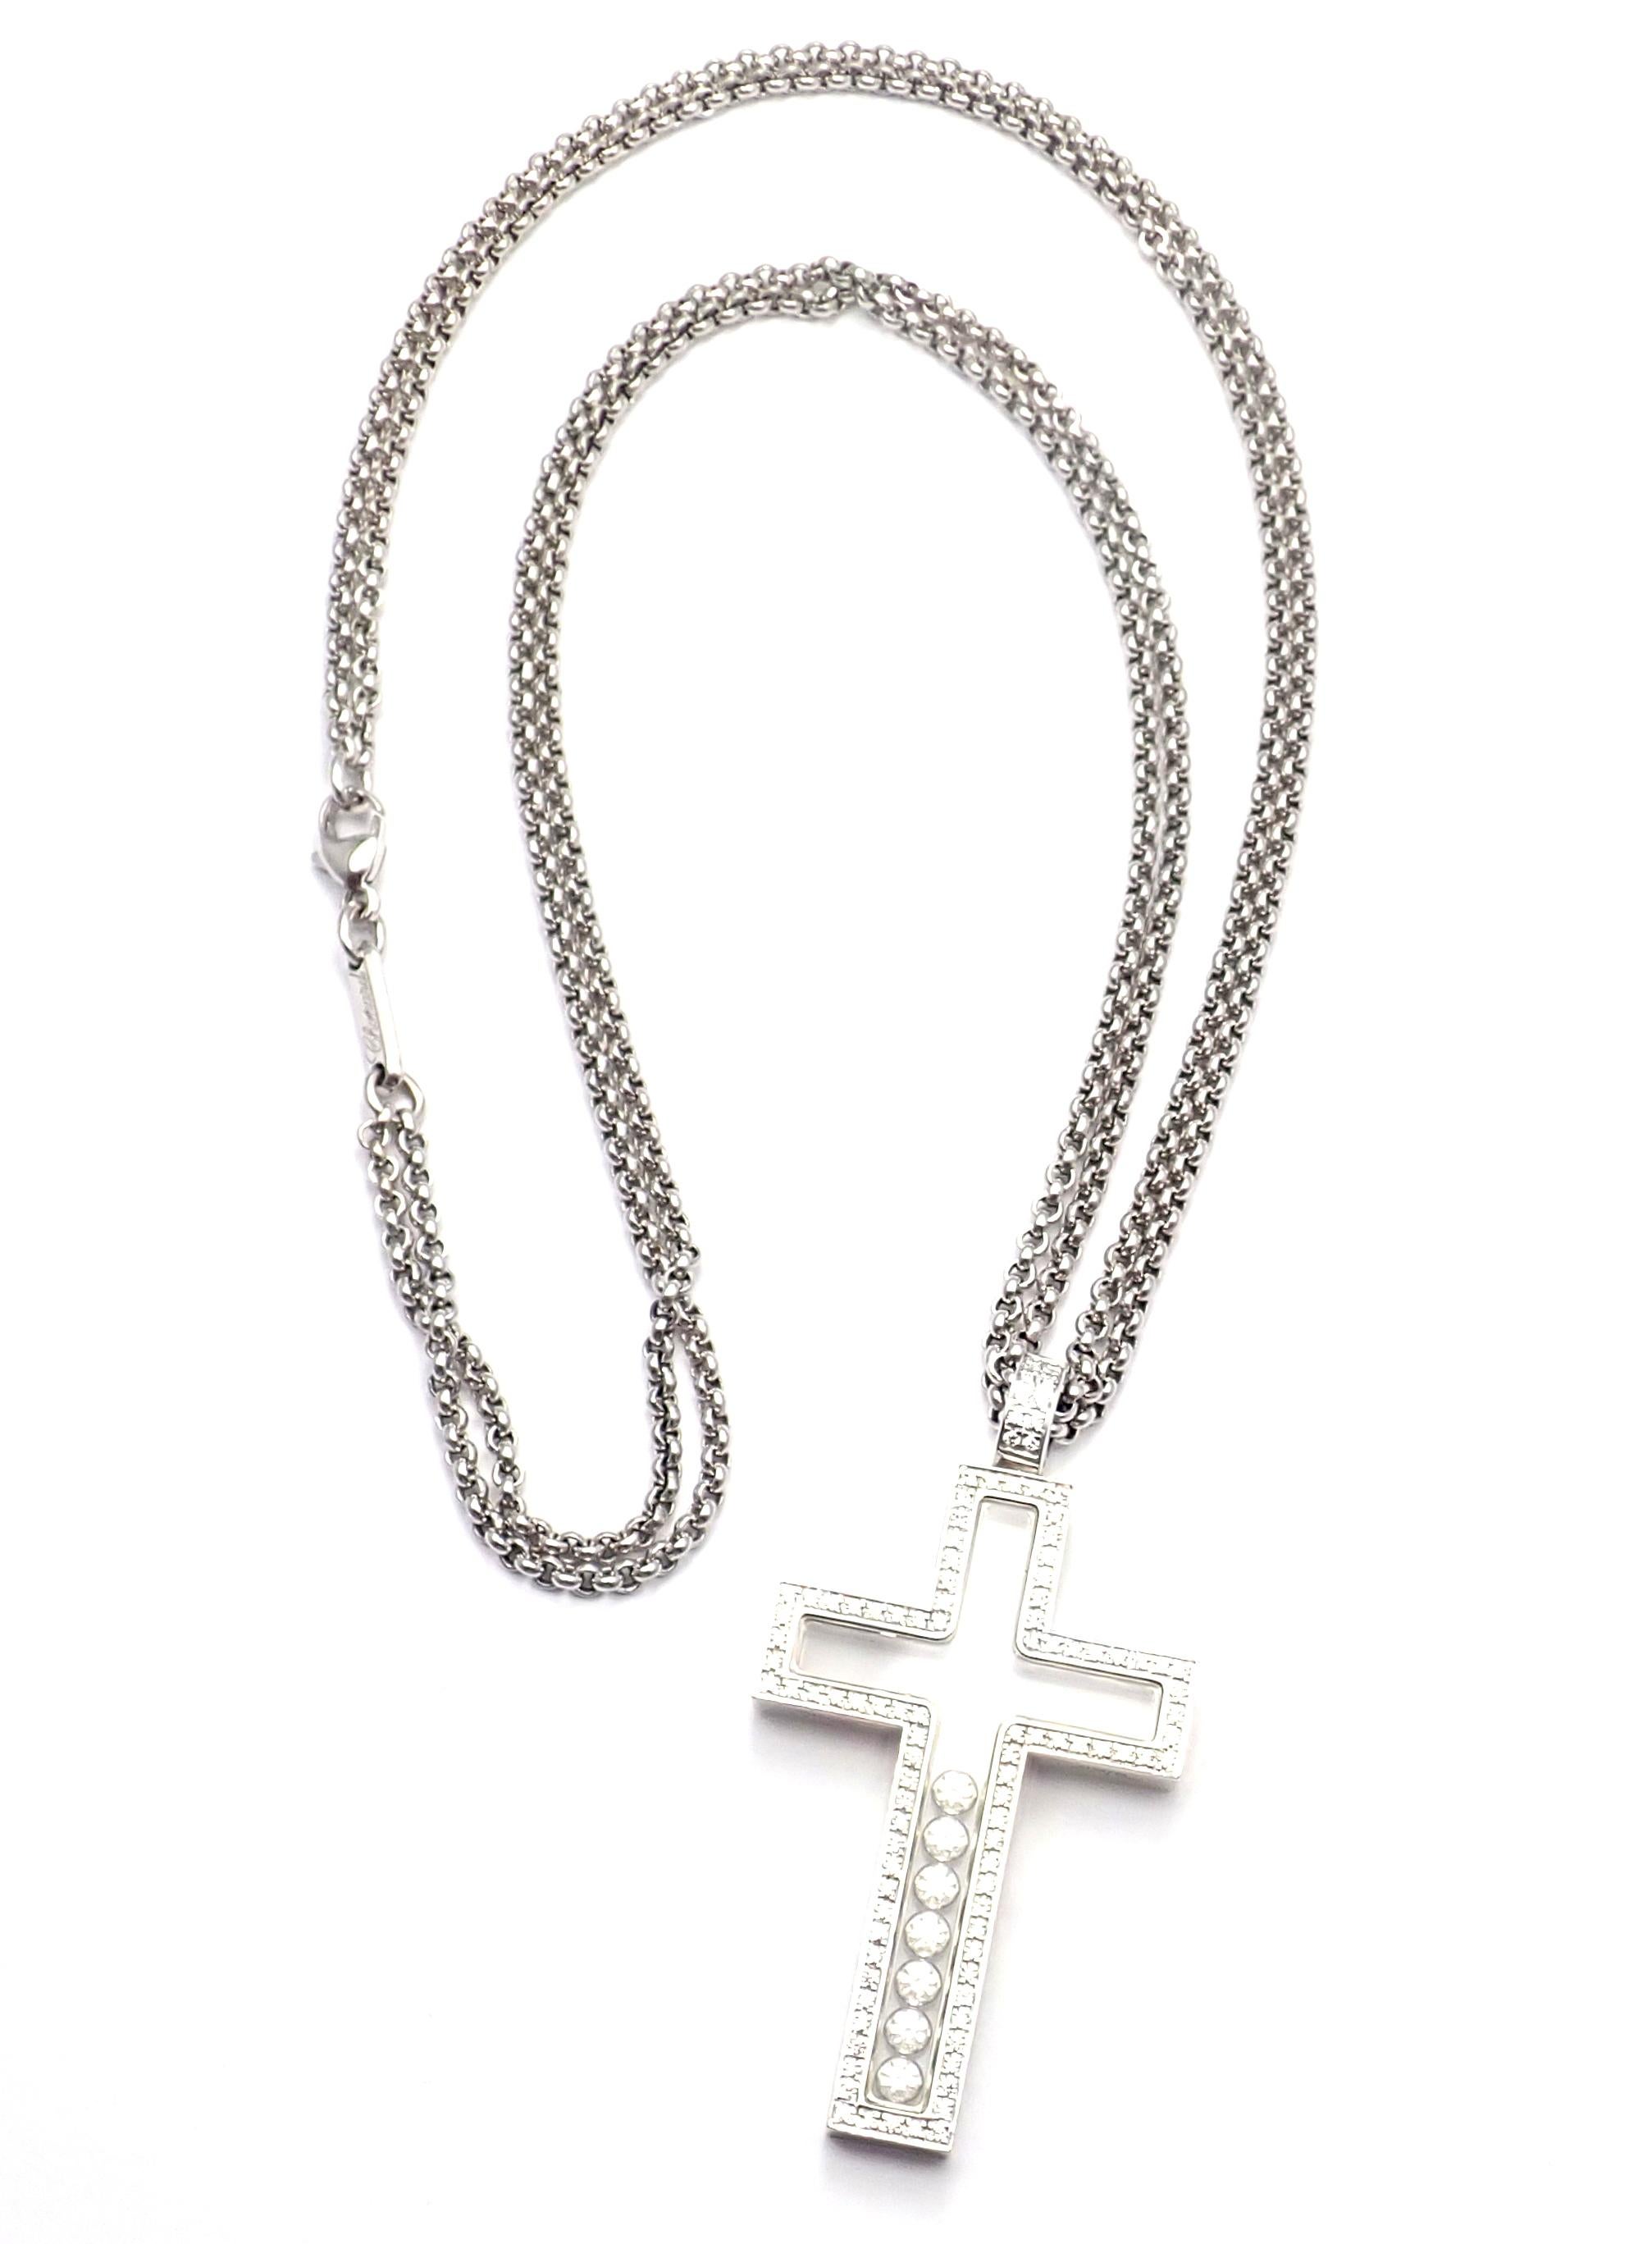 18k White Gold Diamond Happy Diamonds Cross Pendant Necklace by Chopard.  
With Round Brilliant Diamonds = VVS1 clarity, E color total weight 1ct
Details:  
Length: 17